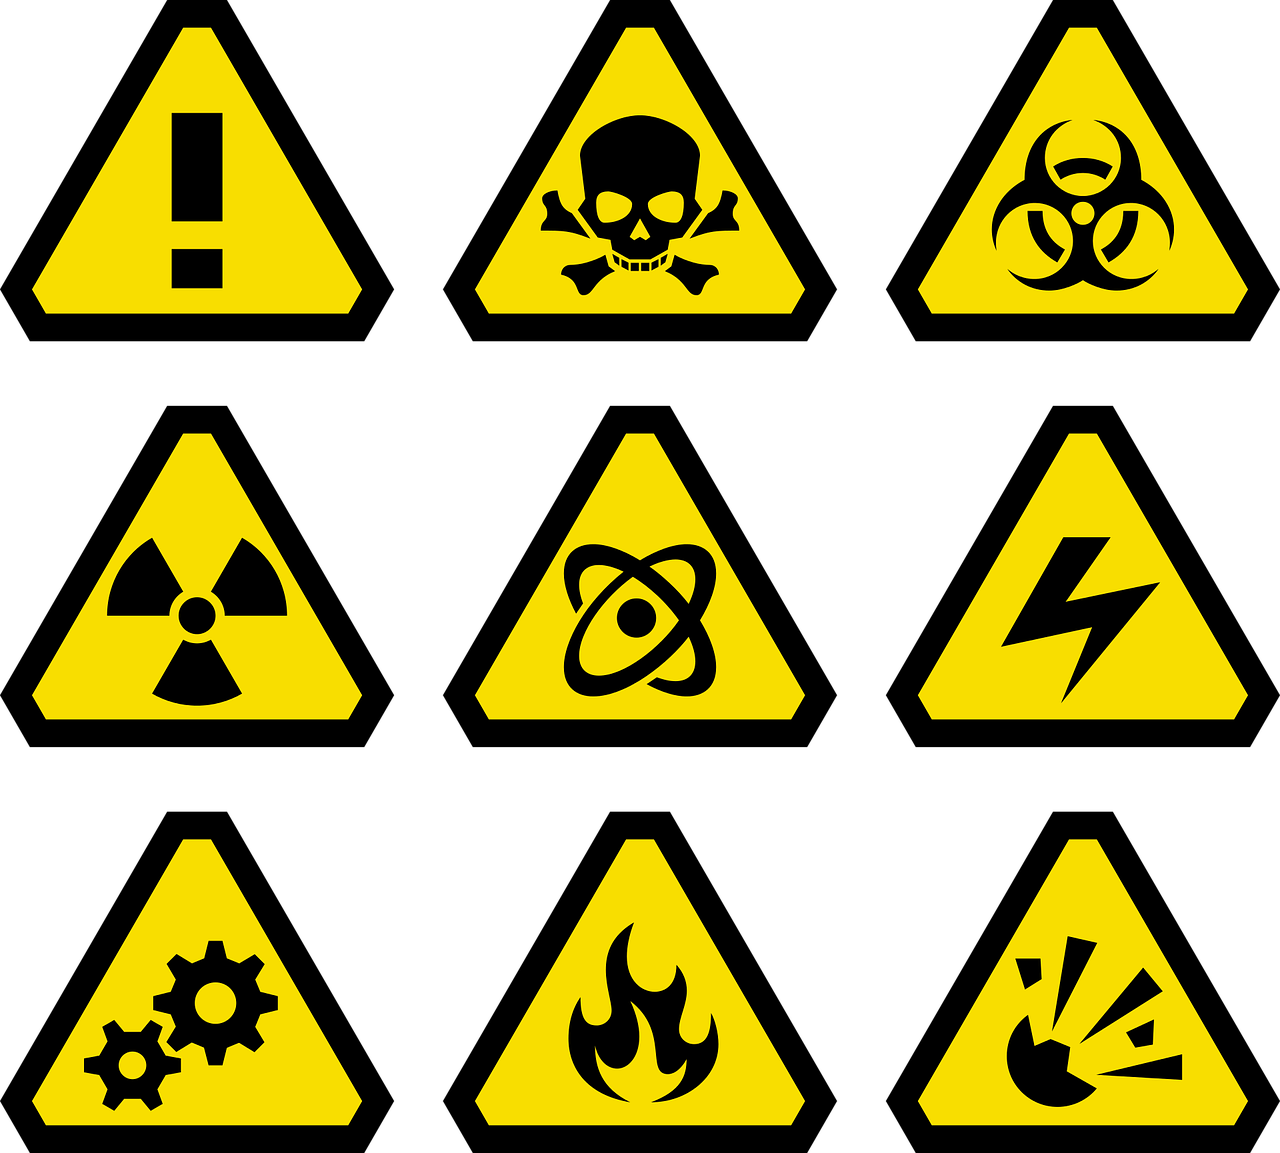 Pictures of signs of danger